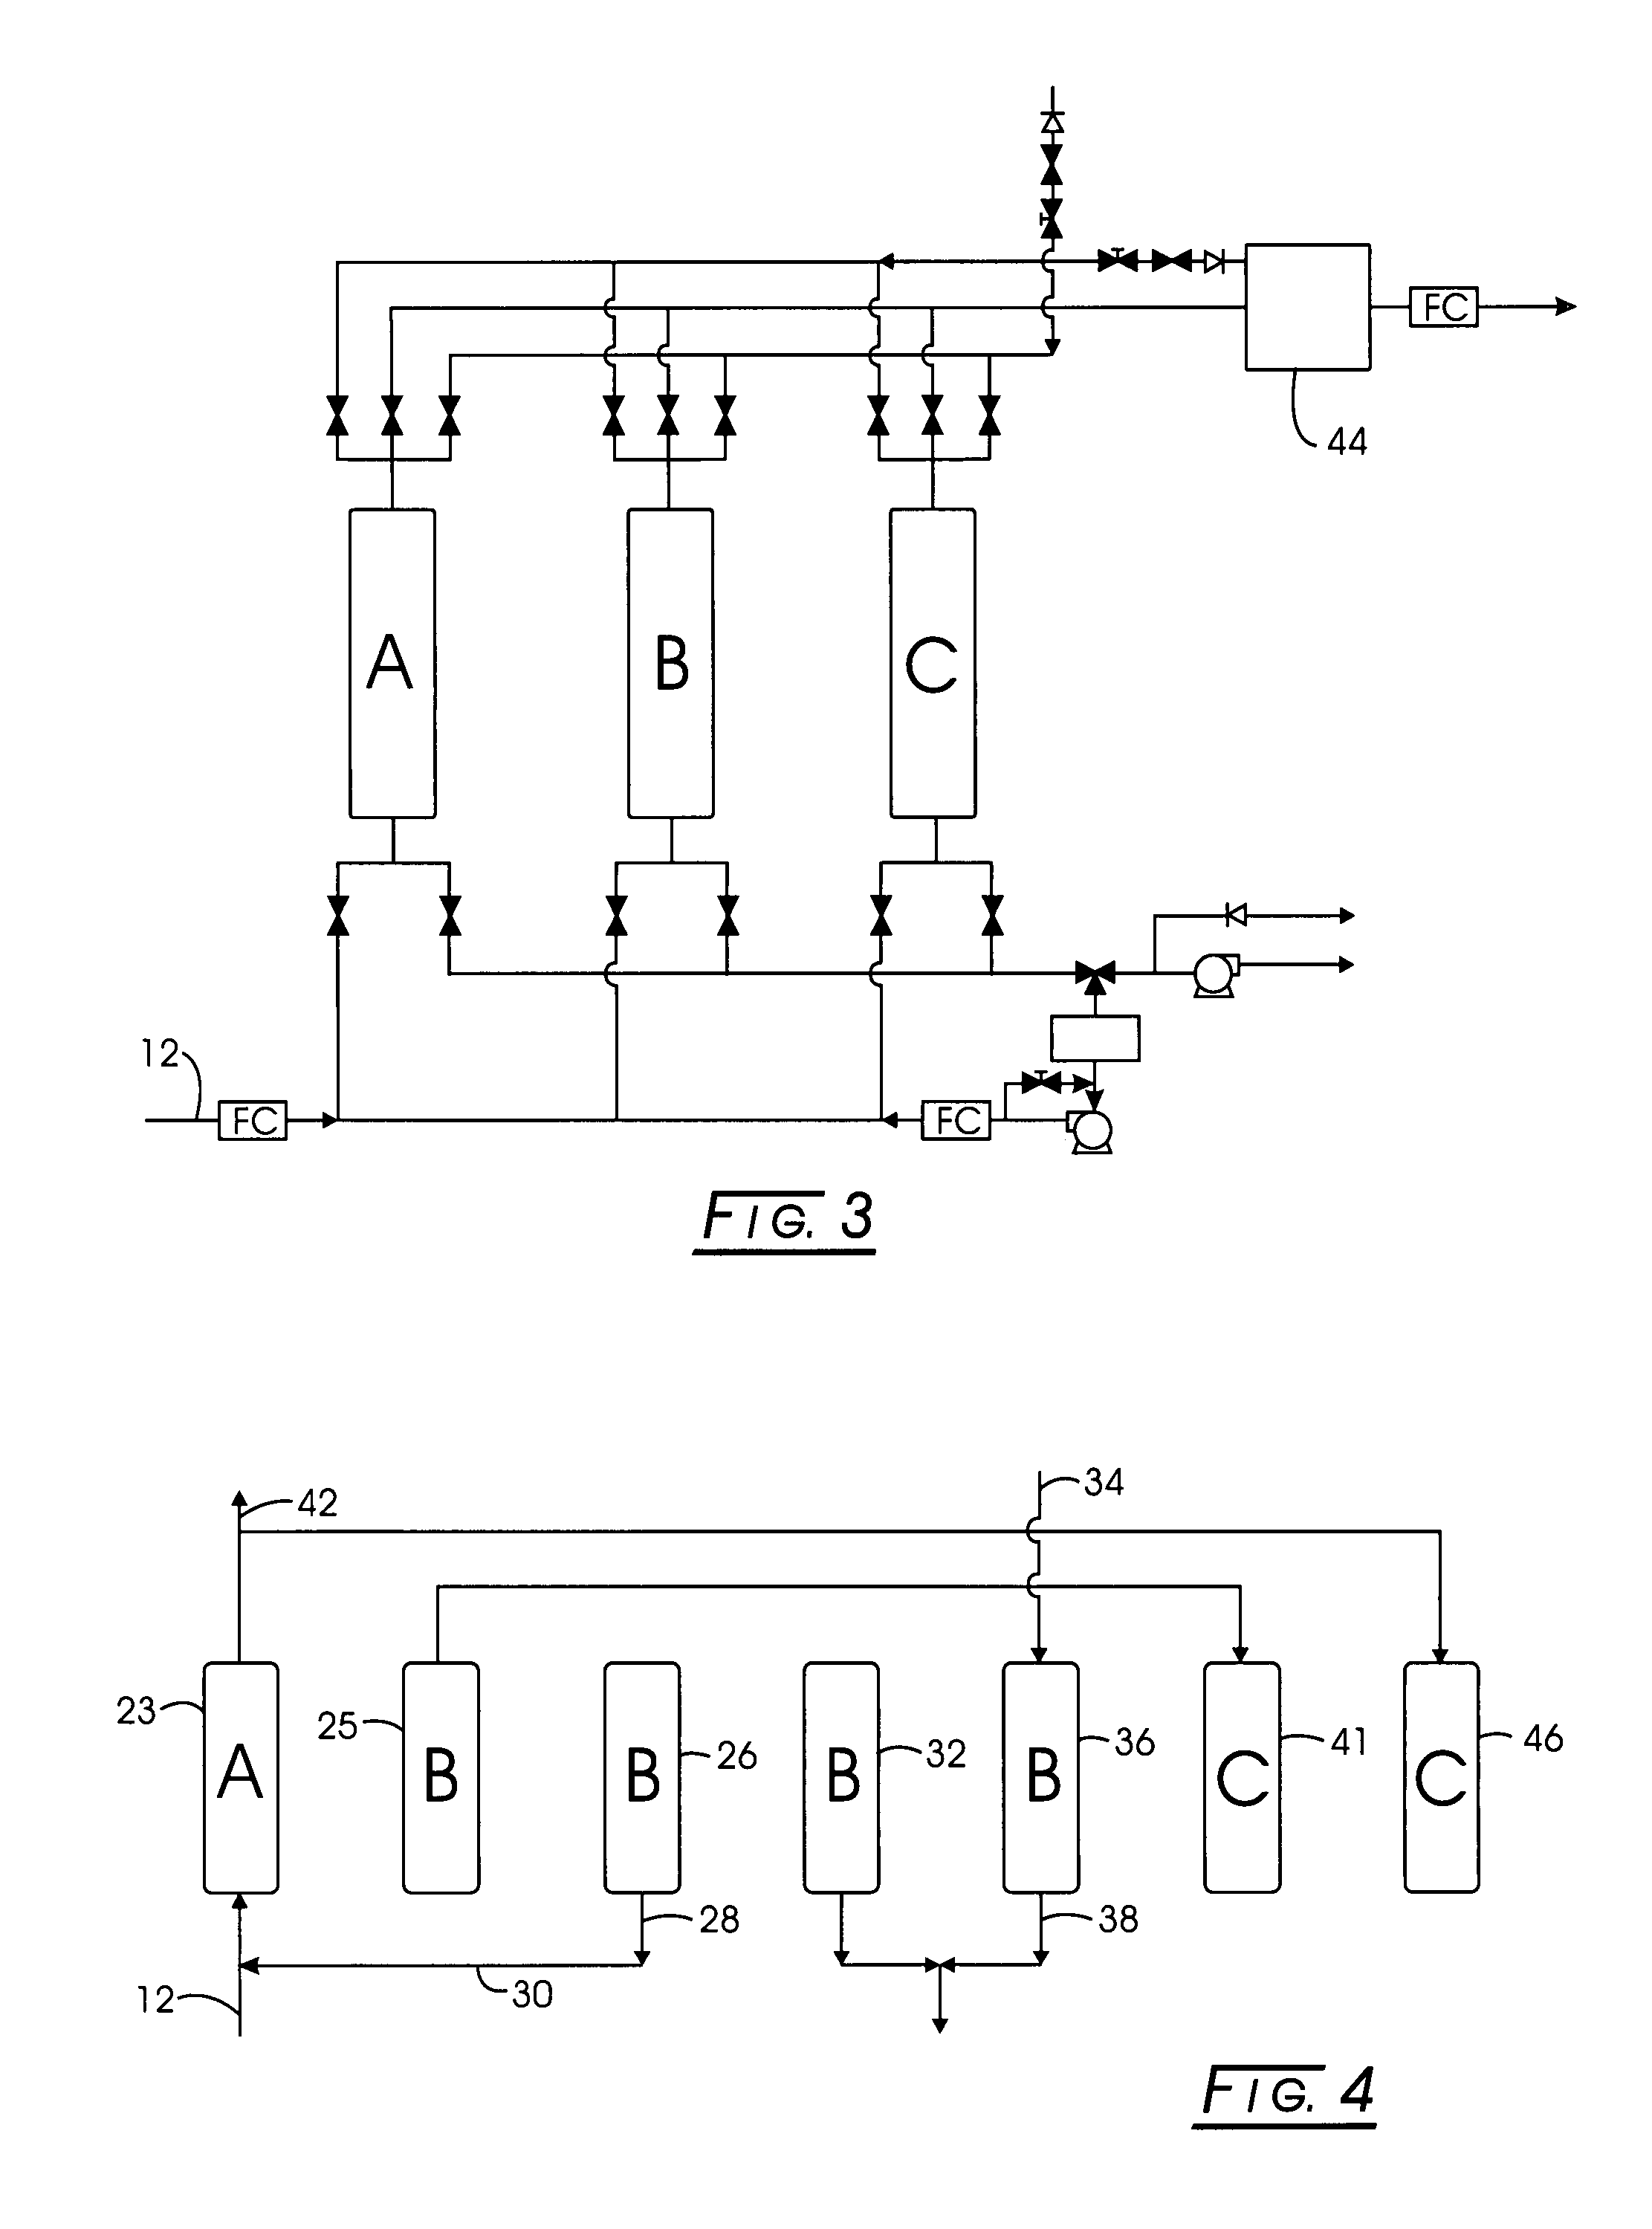 Multi-stage adsorption system for gas mixture separation